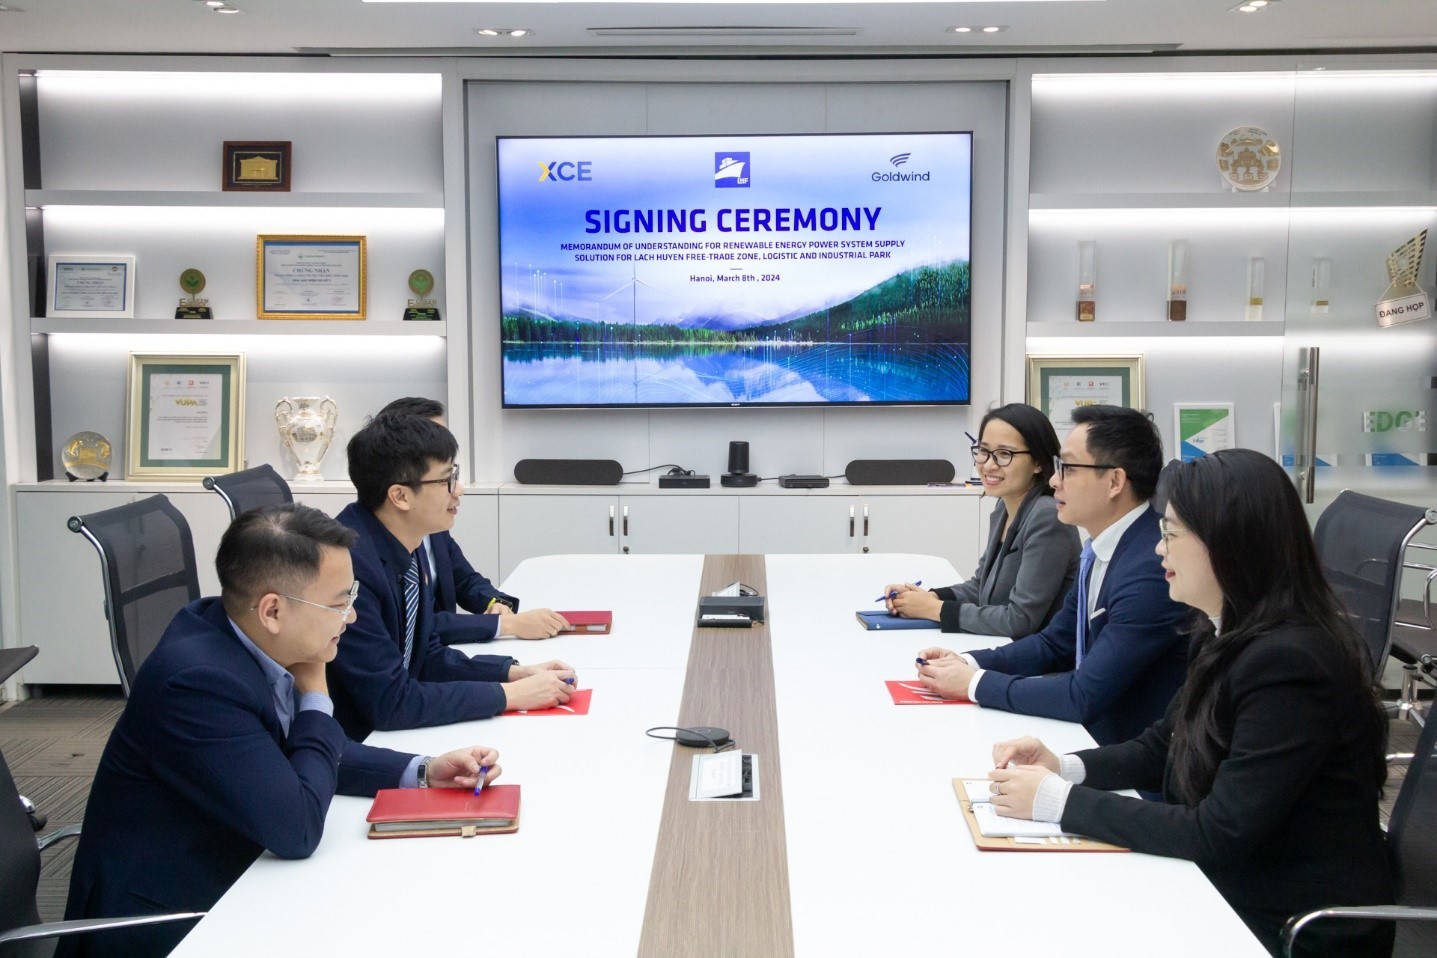 XCE Energy and clean energy company Goldwind signed Memorandum of Understanding (MOU) on renewable energy power system solutions for industrial parks